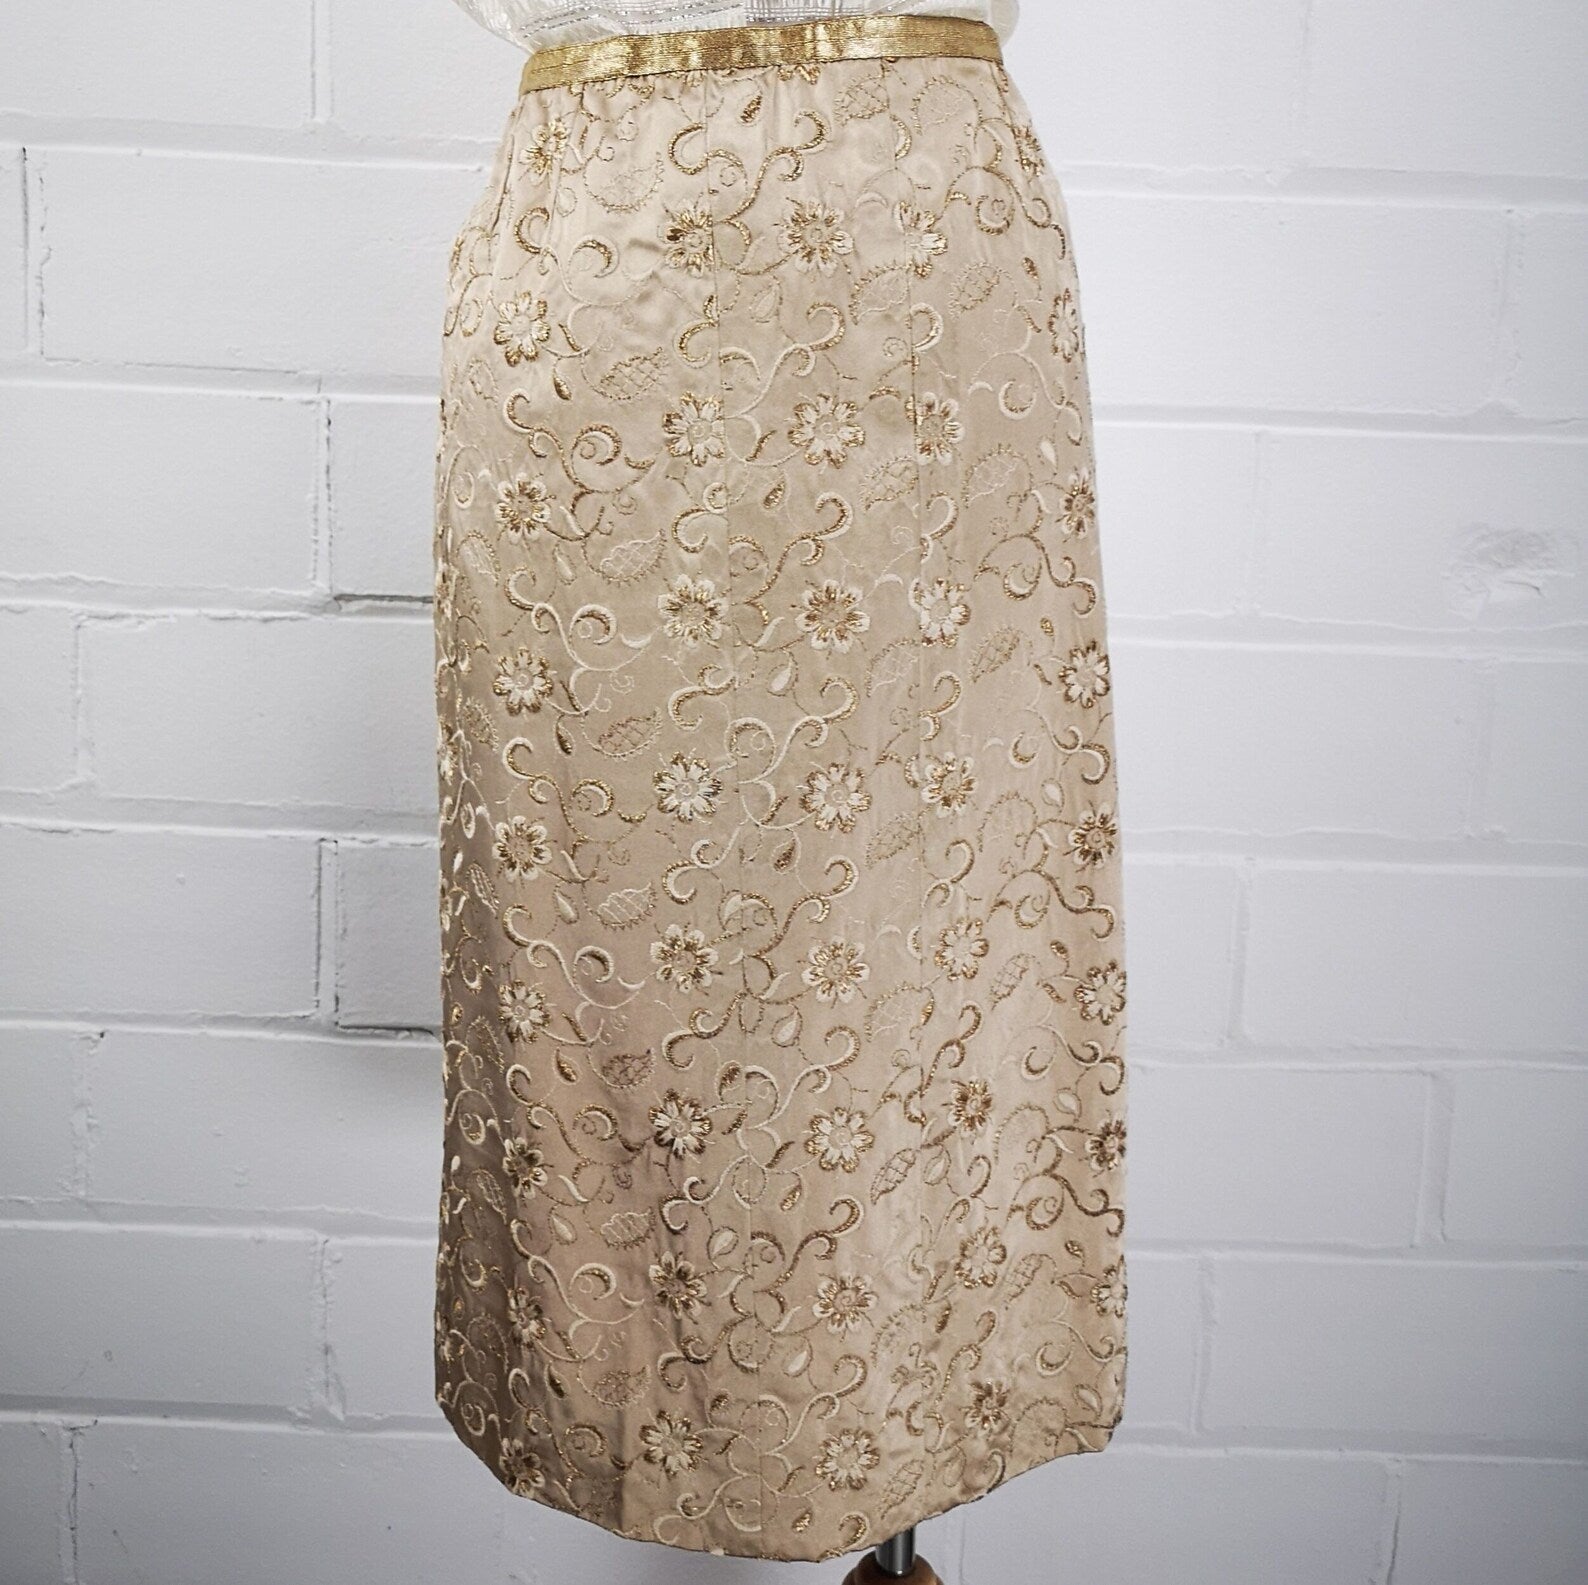 Vintage 60's Champagne Gold Metallic Floral Embroidered Silk Pencil Skirt with Pink Lining, W 24", Swinging 60's Mod Cocktail Party